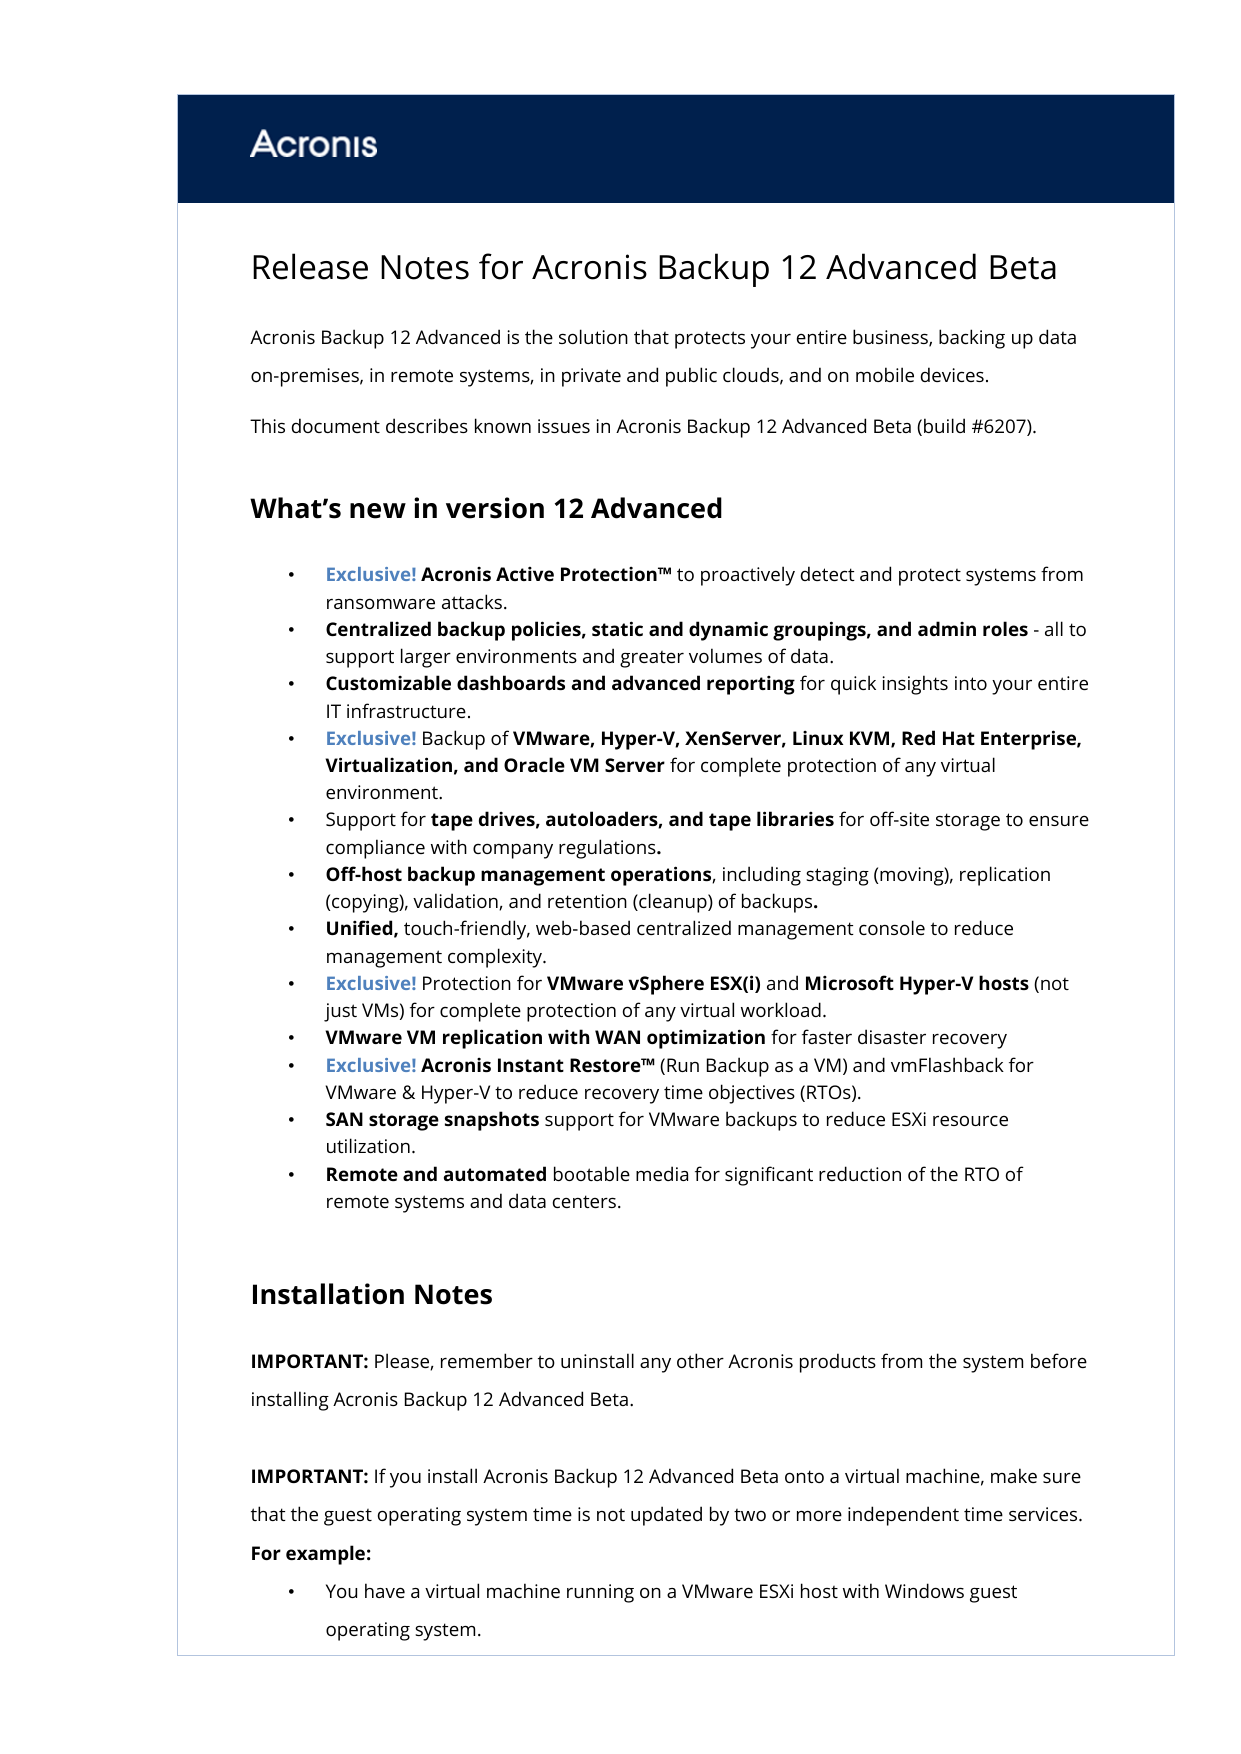 Release Notes For Acronis Backup 12 Advanced Beta Manualzz